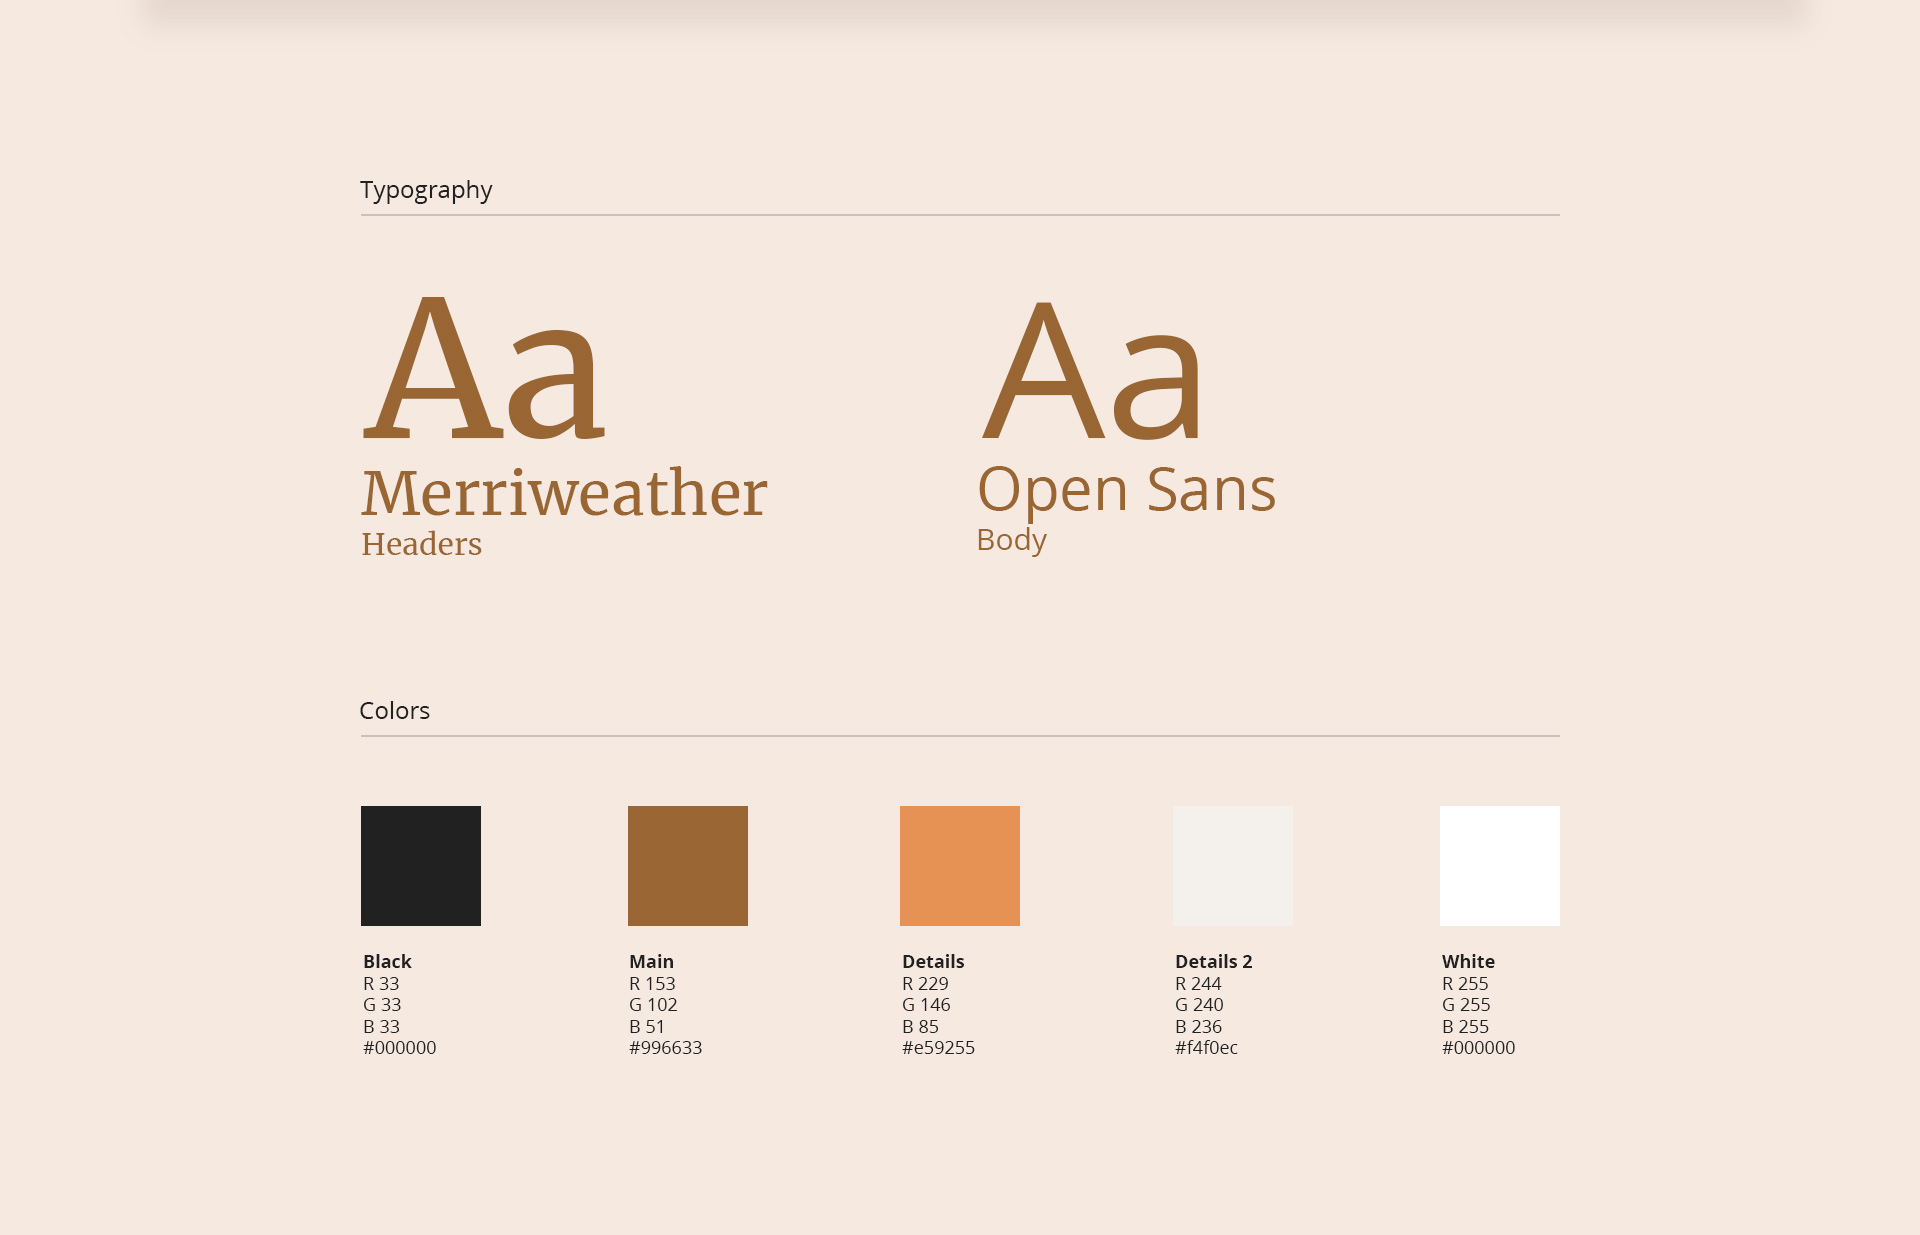 Typography and colors